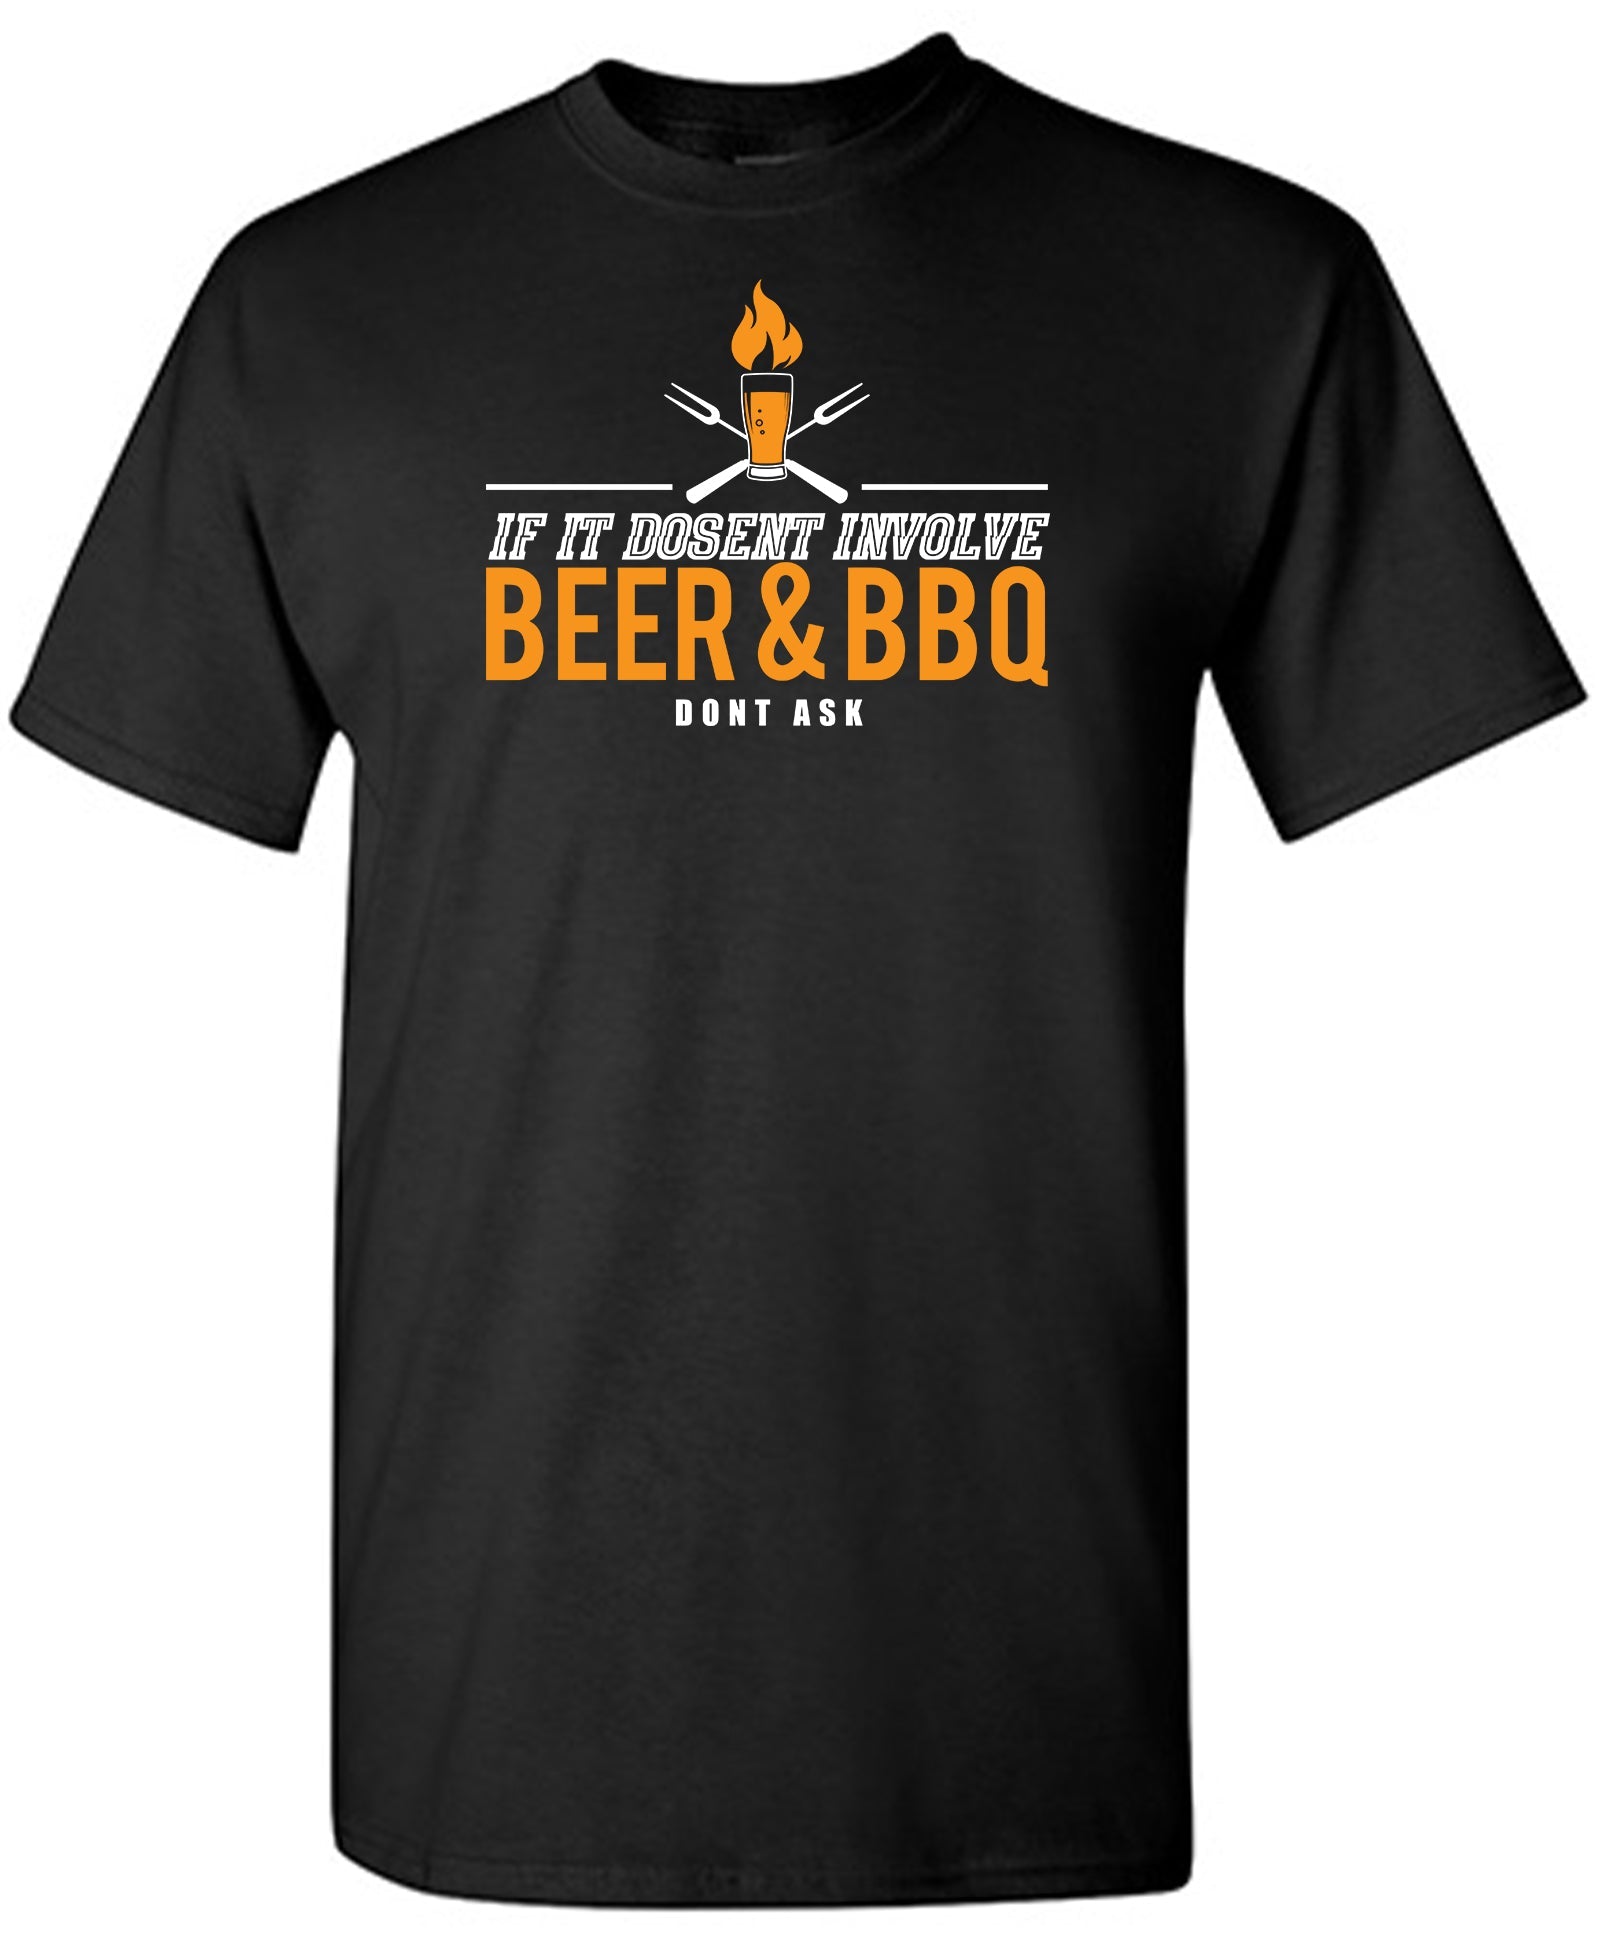 If It Doesn't Involve Beer and BBQ, Don't Ask - Funny T Shirts & Graphic Tees